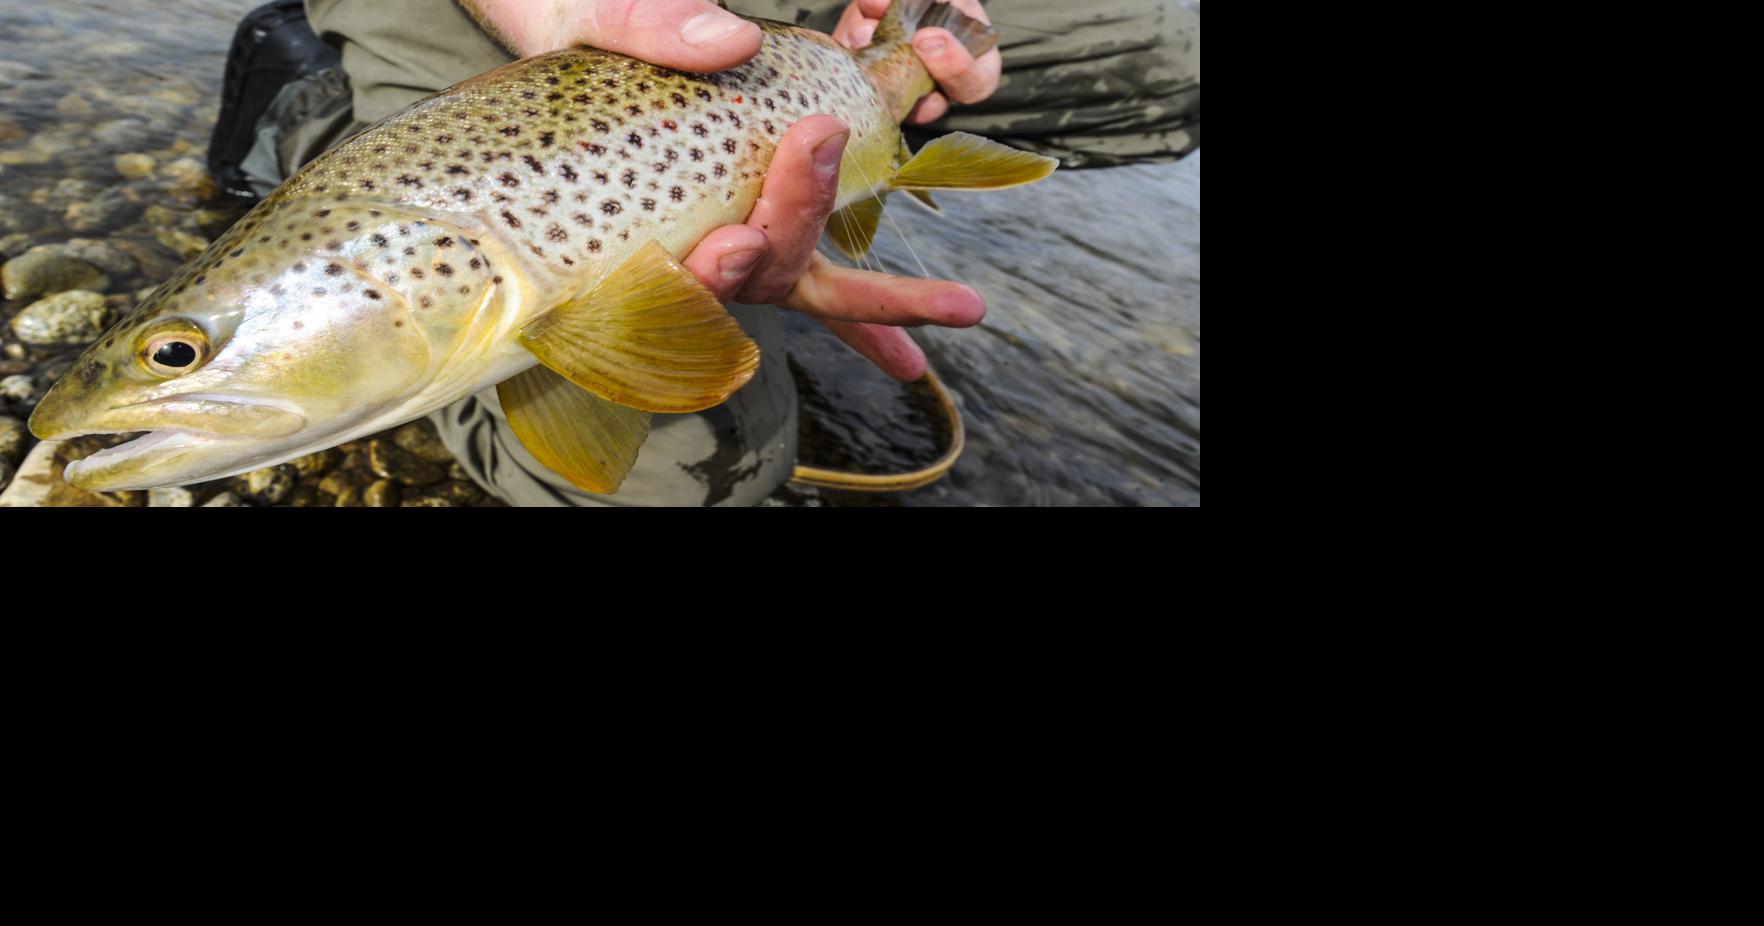 Few options to help struggling brown trout populations in SW Montana